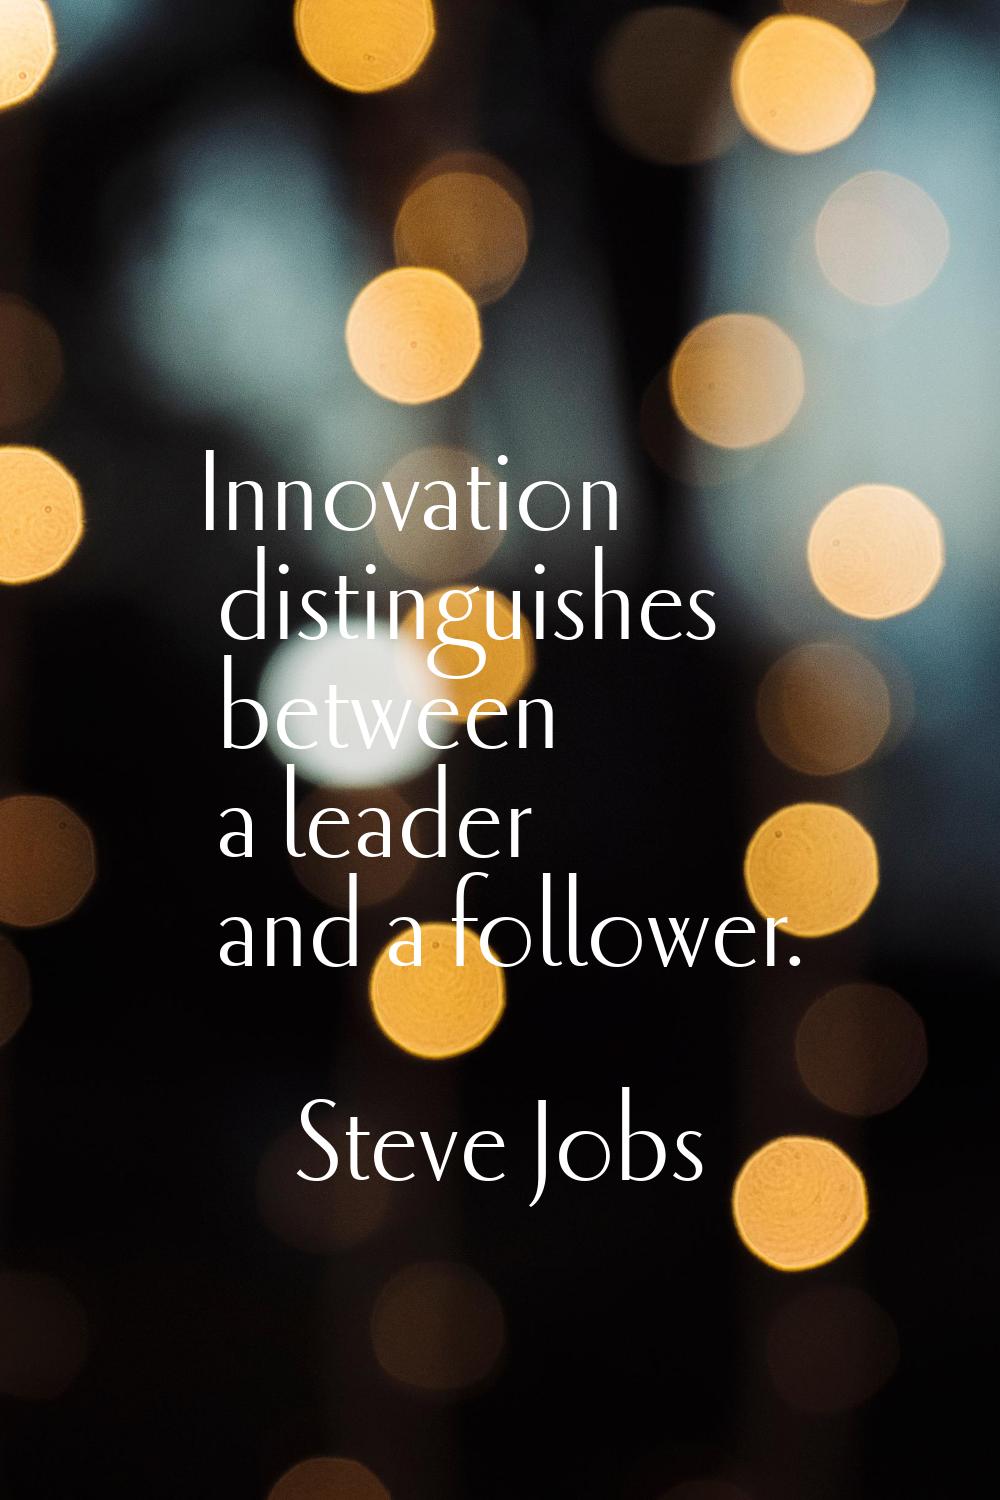 Innovation distinguishes between a leader and a follower.